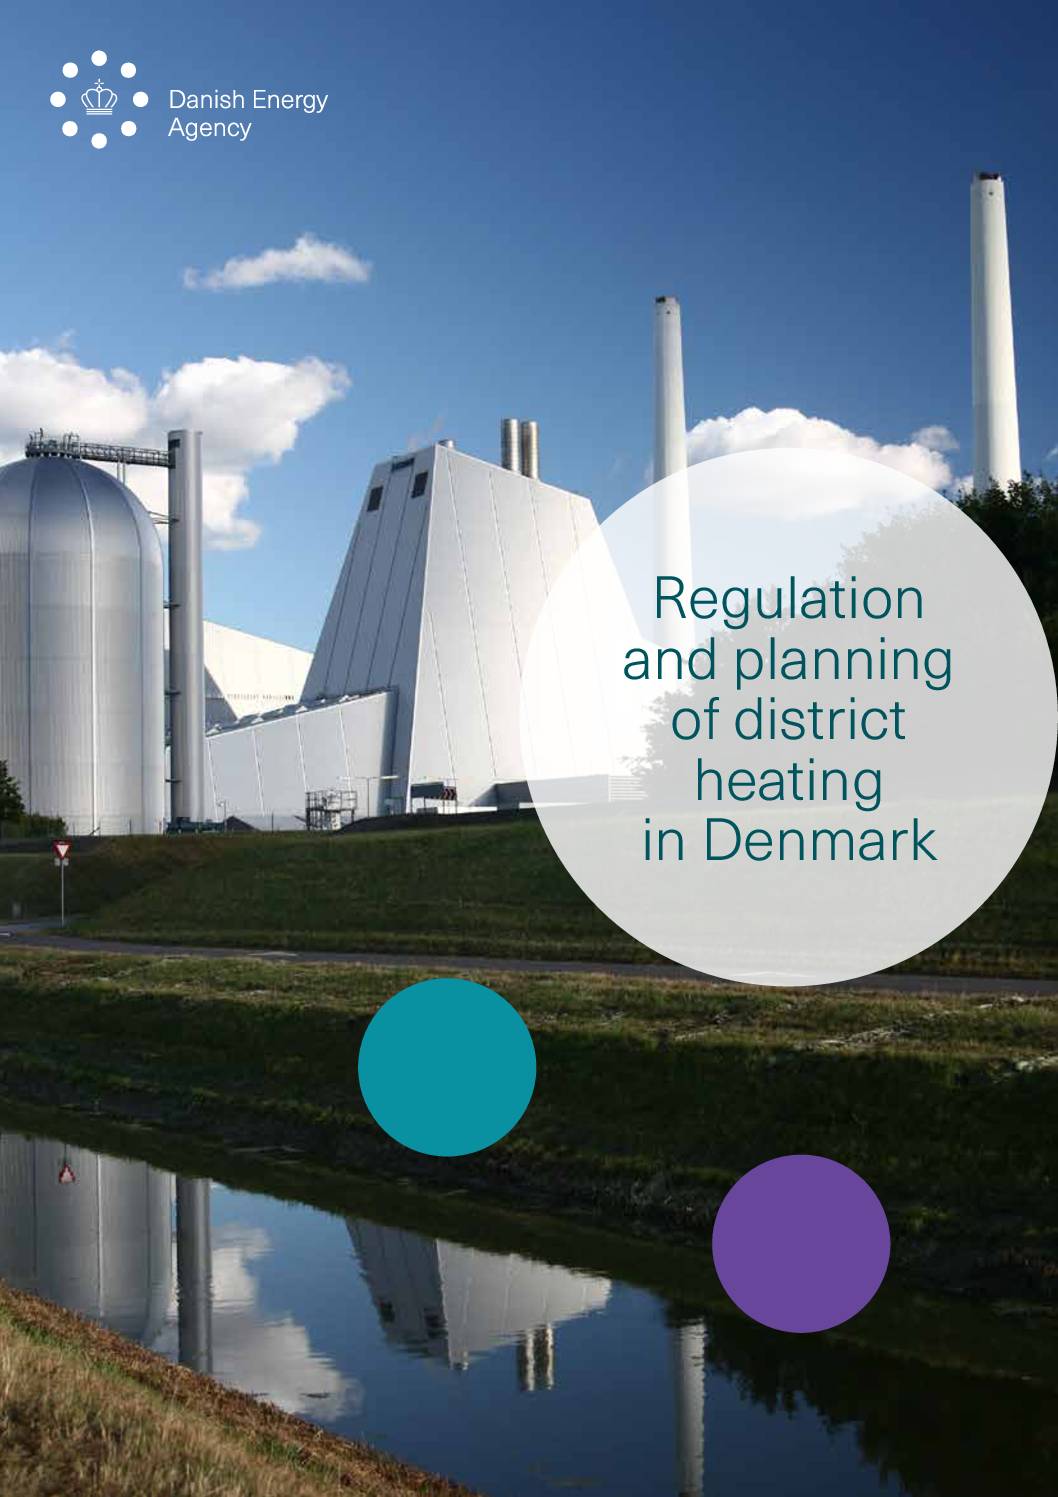 Regulation and planning of district heating in Denmark